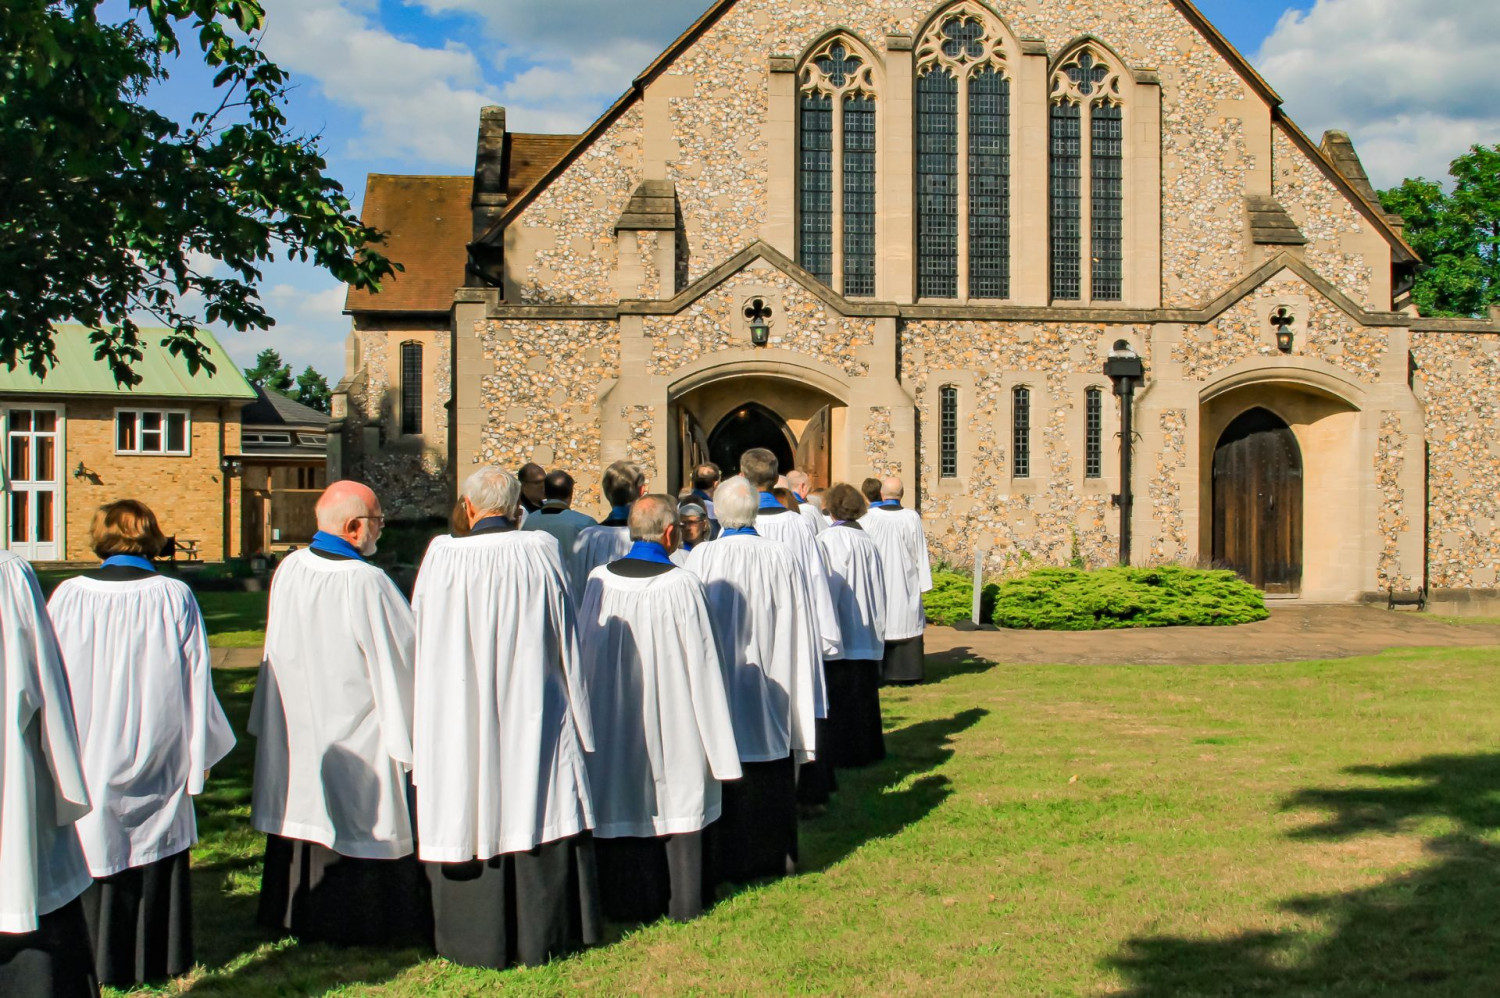 Line of robed lay ministers outside a church on a sunny day